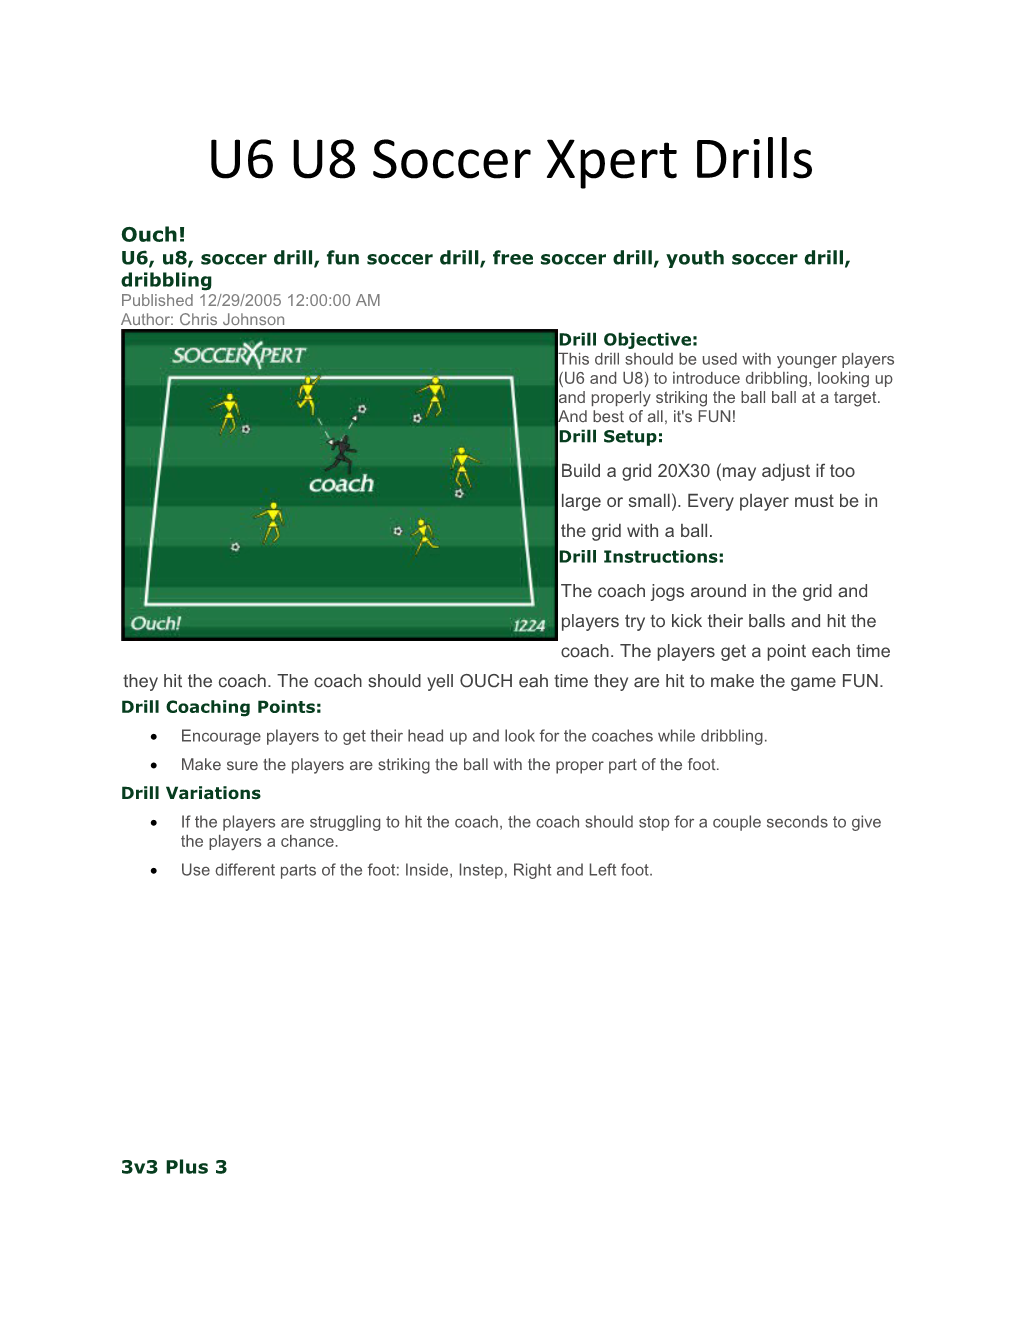 U6, U8, Soccer Drill, Fun Soccer Drill, Free Soccer Drill, Youth Soccer Drill, Dribbling